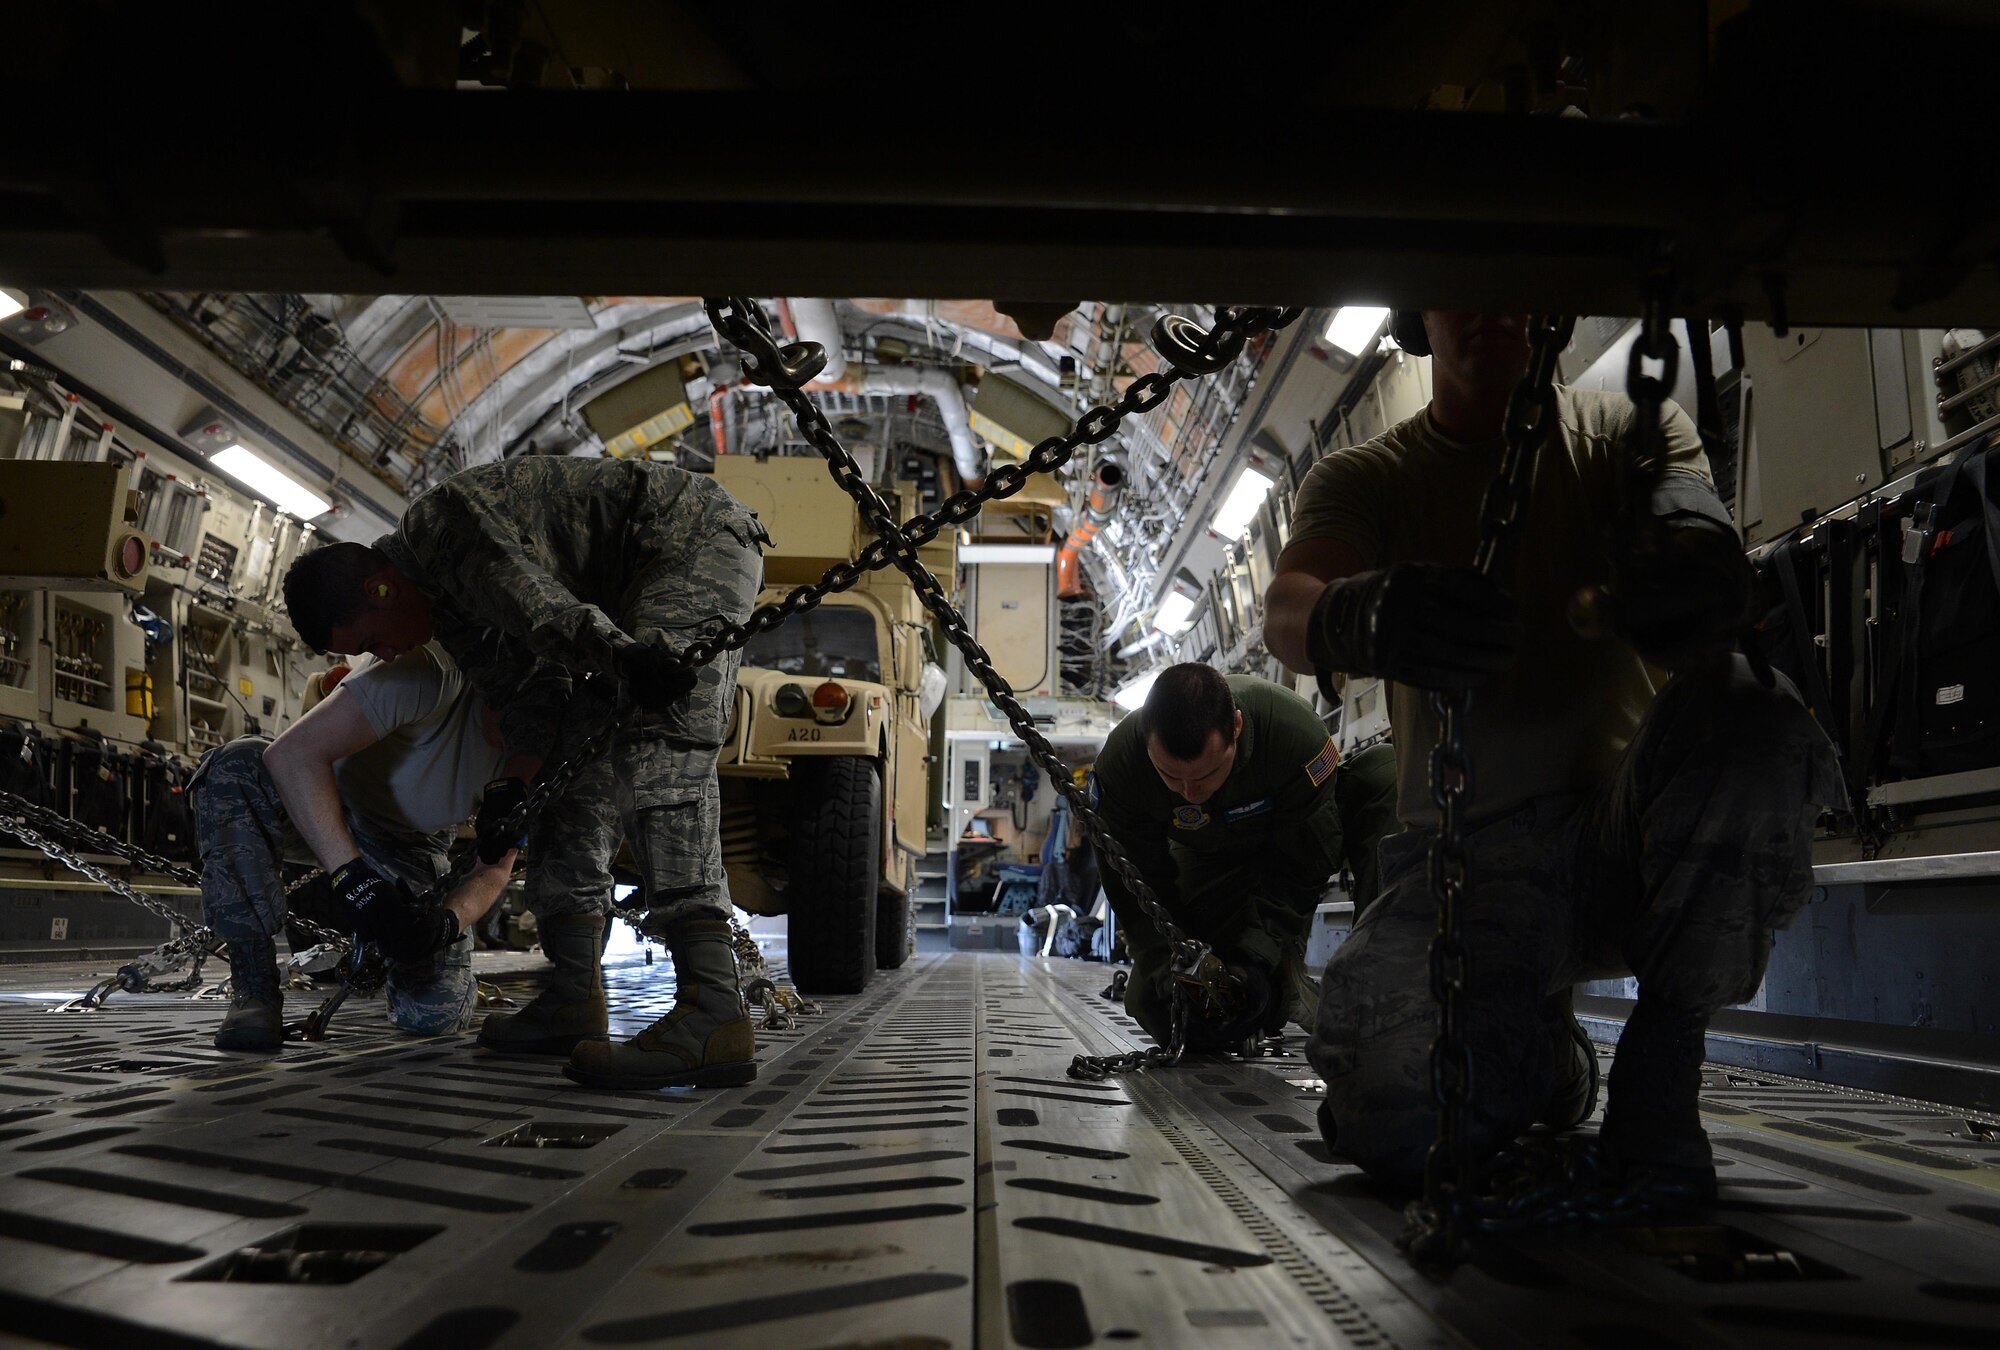 Airmen from the 62nd Aerial Port Squadron and the 7th Airlift Squadron chain down a High Mobility Artillery Rocket System on a C-17 Globemaster III aircraft June 22, 2016, at Joint Base Lewis-McChord, Wash. Each vehicle had to be chained down according to technical orders so they wouldn’t move during the flight to Moses Lake, Wash., for a rapid infiltration HI-RAIN exercise. (U.S. Air Force photo/Senior Airman Jacob Jimenez) 